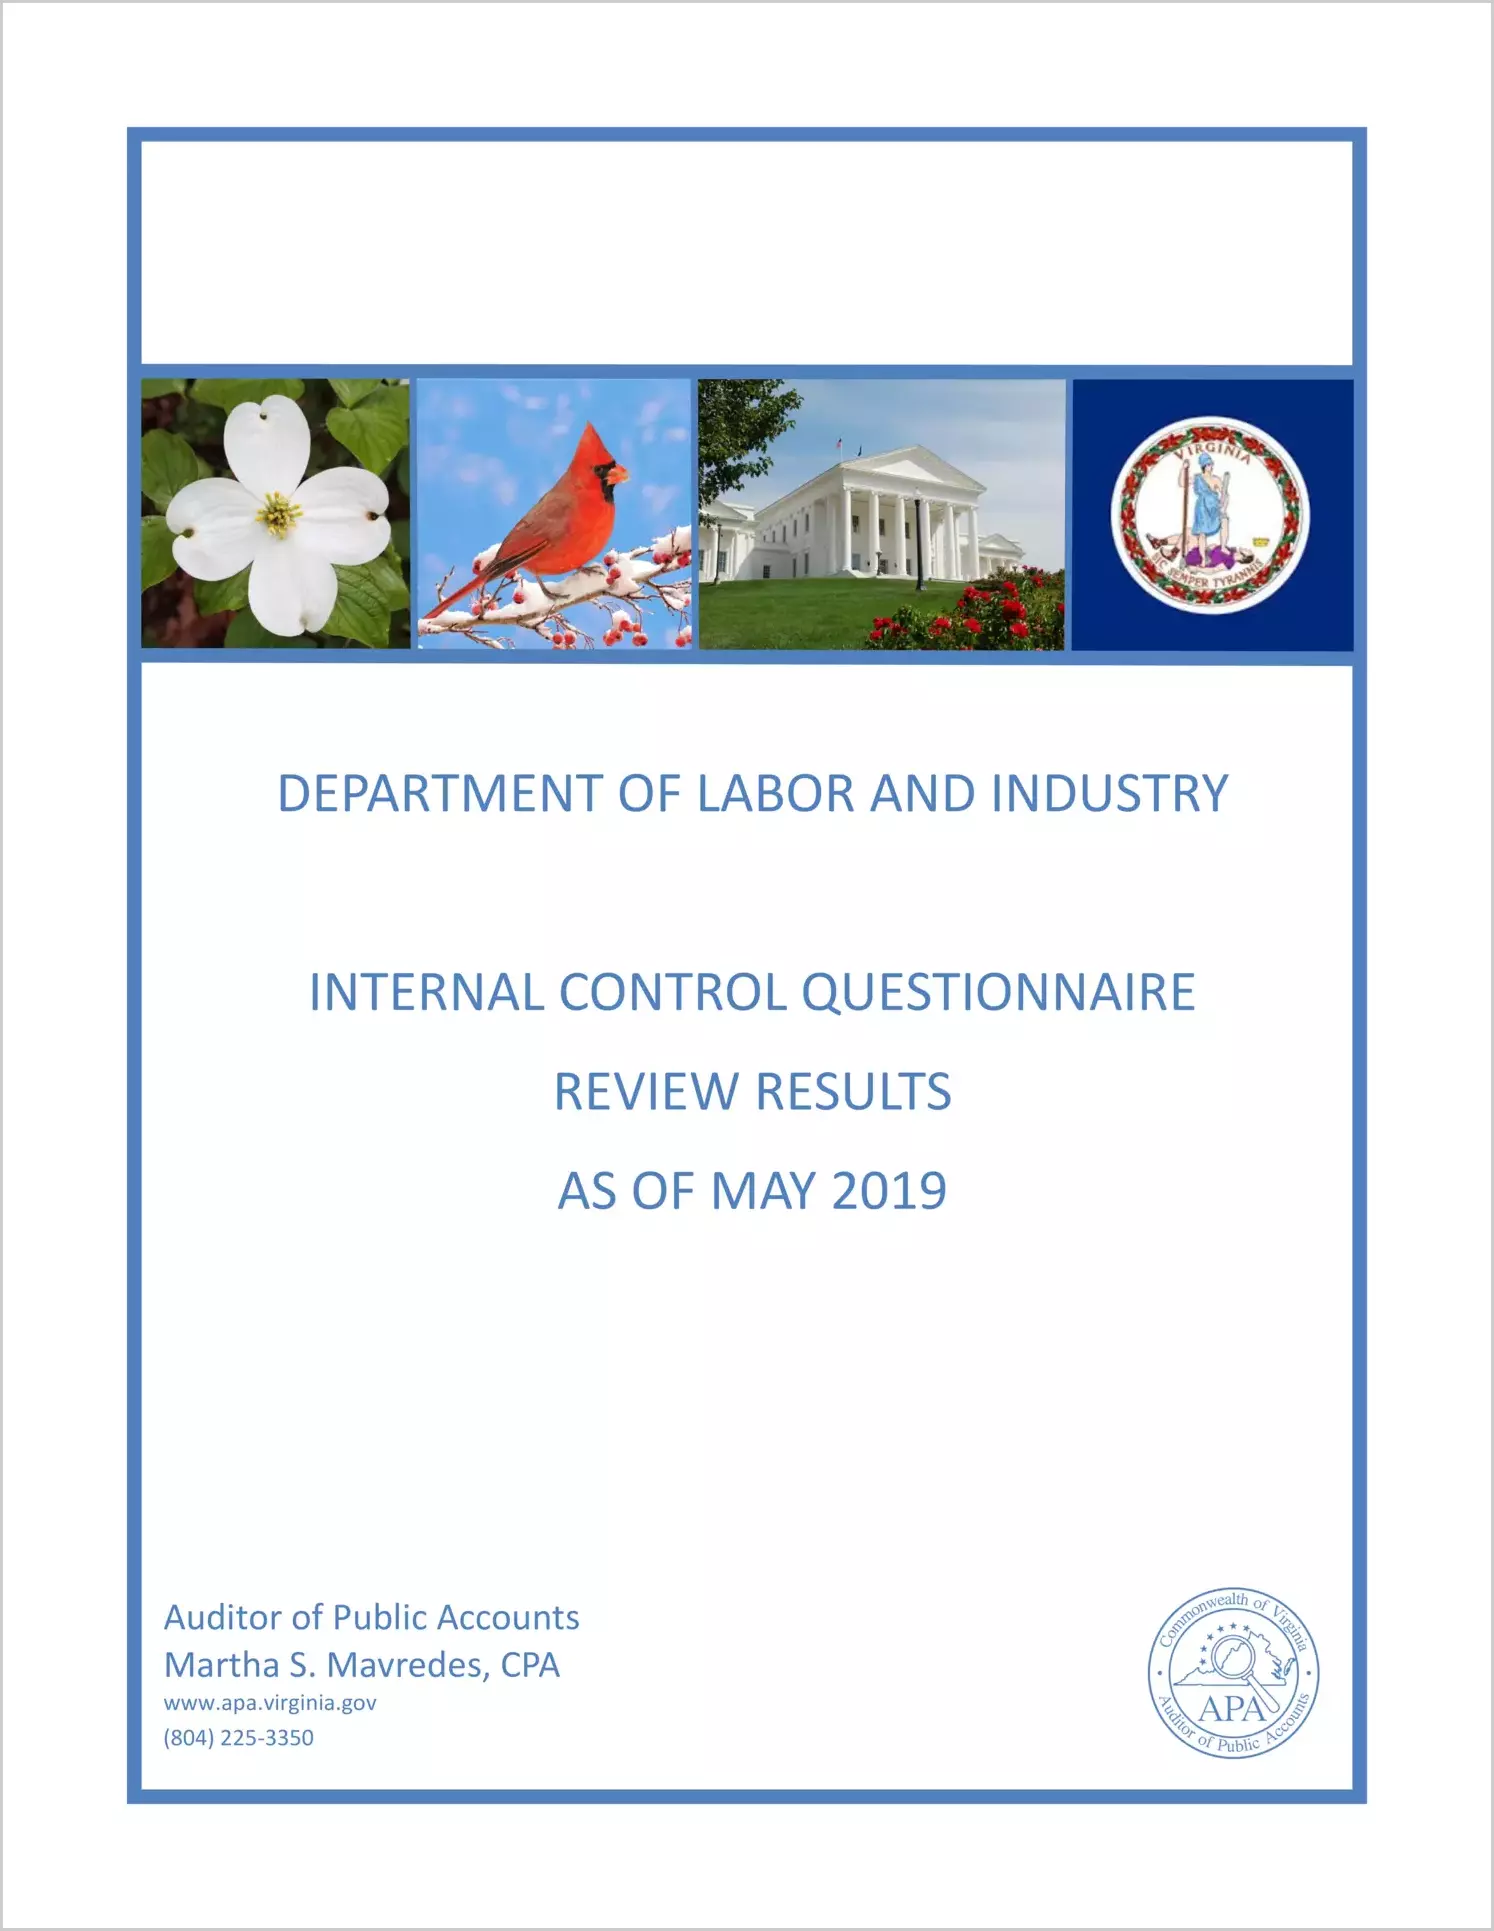 Department of Labor and Industry Internal Control Questionnaire Review Results as of May 2019